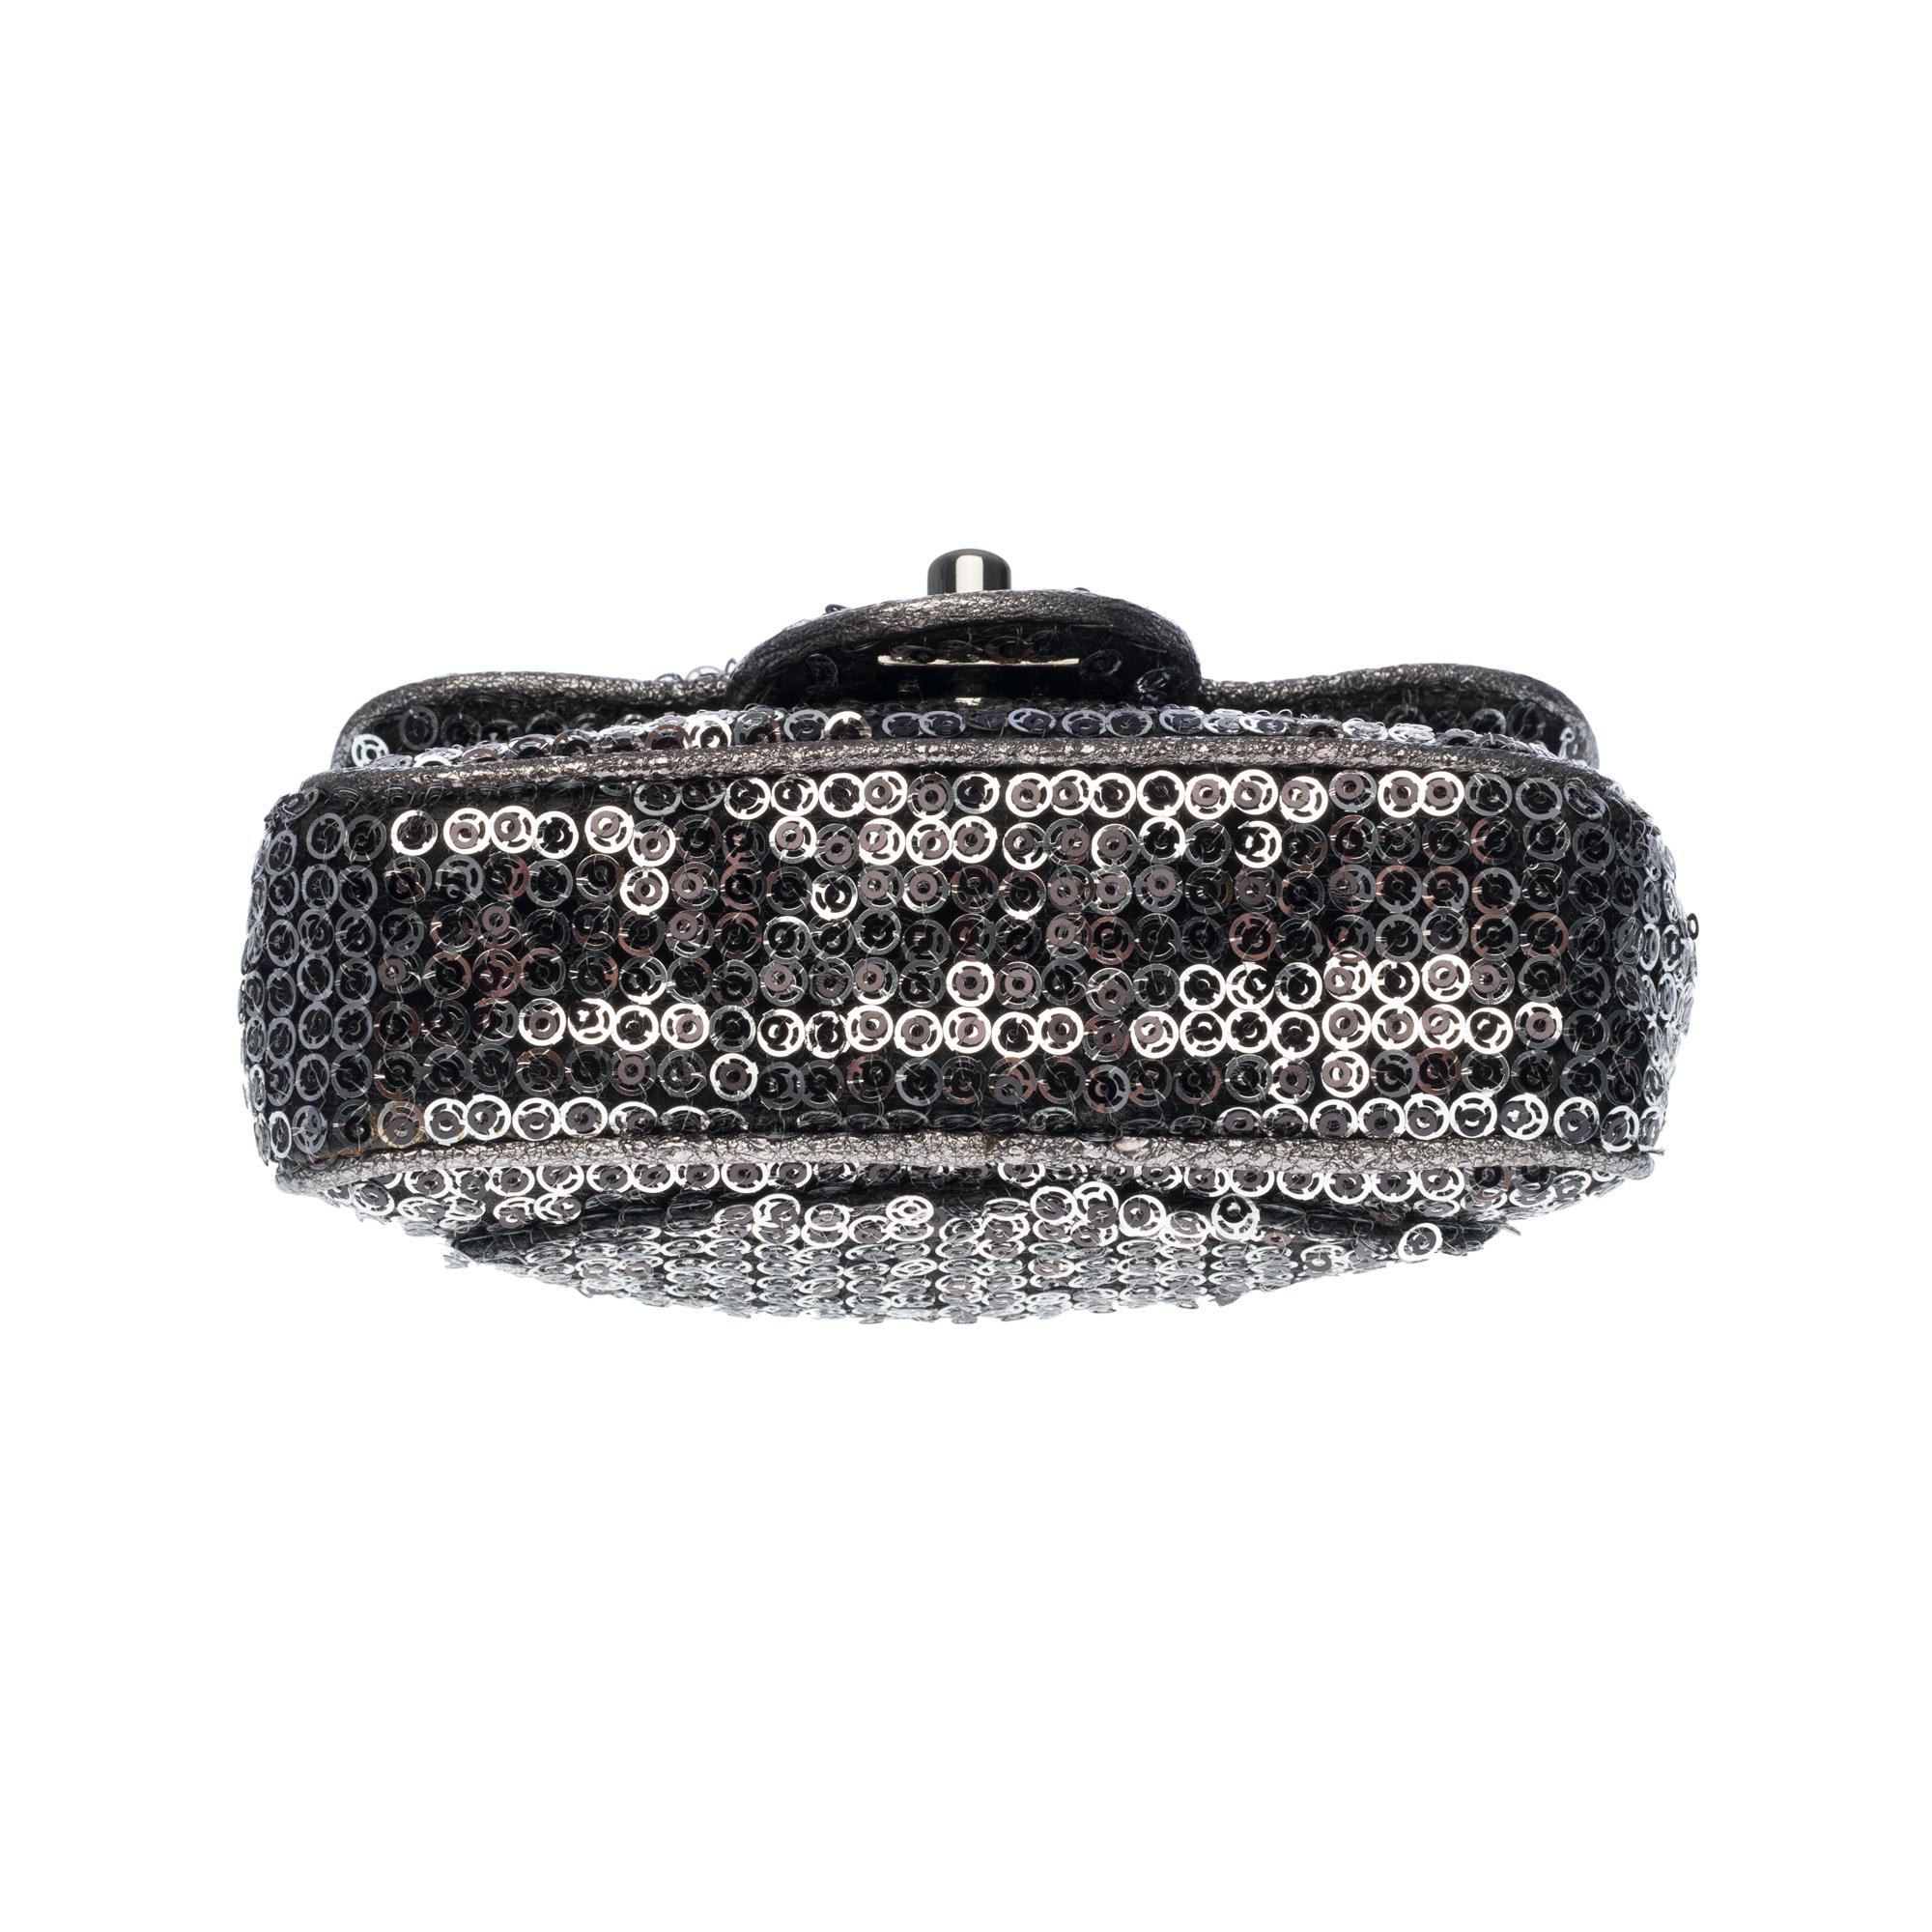 Limited Edition Chanel Mini Flap bag shoulder bag in micro silver sequins, SHW 1